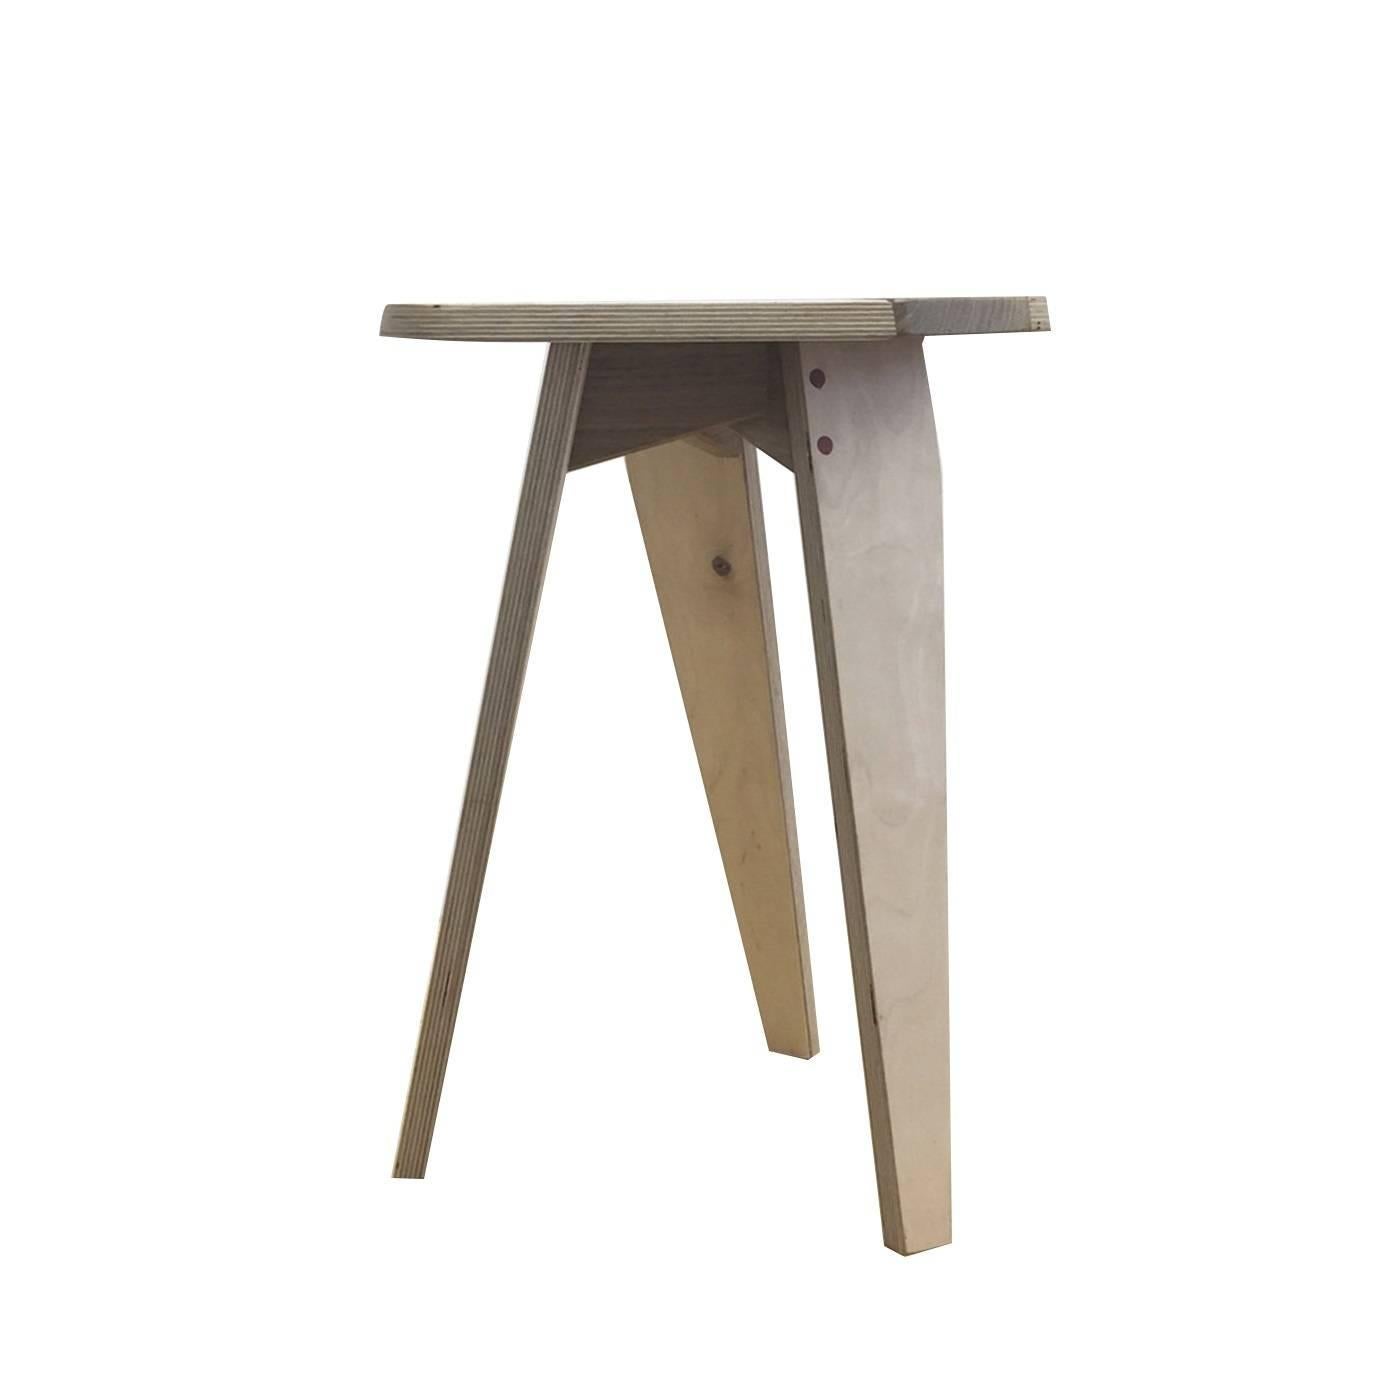 Part of a series of stools entitled LW, this piece can also double as a small table or side table, thanks to its simple and versatile shape. The three legs in ashwood and solid beechwood support a top in multi-layer birchwood whose pale coloration